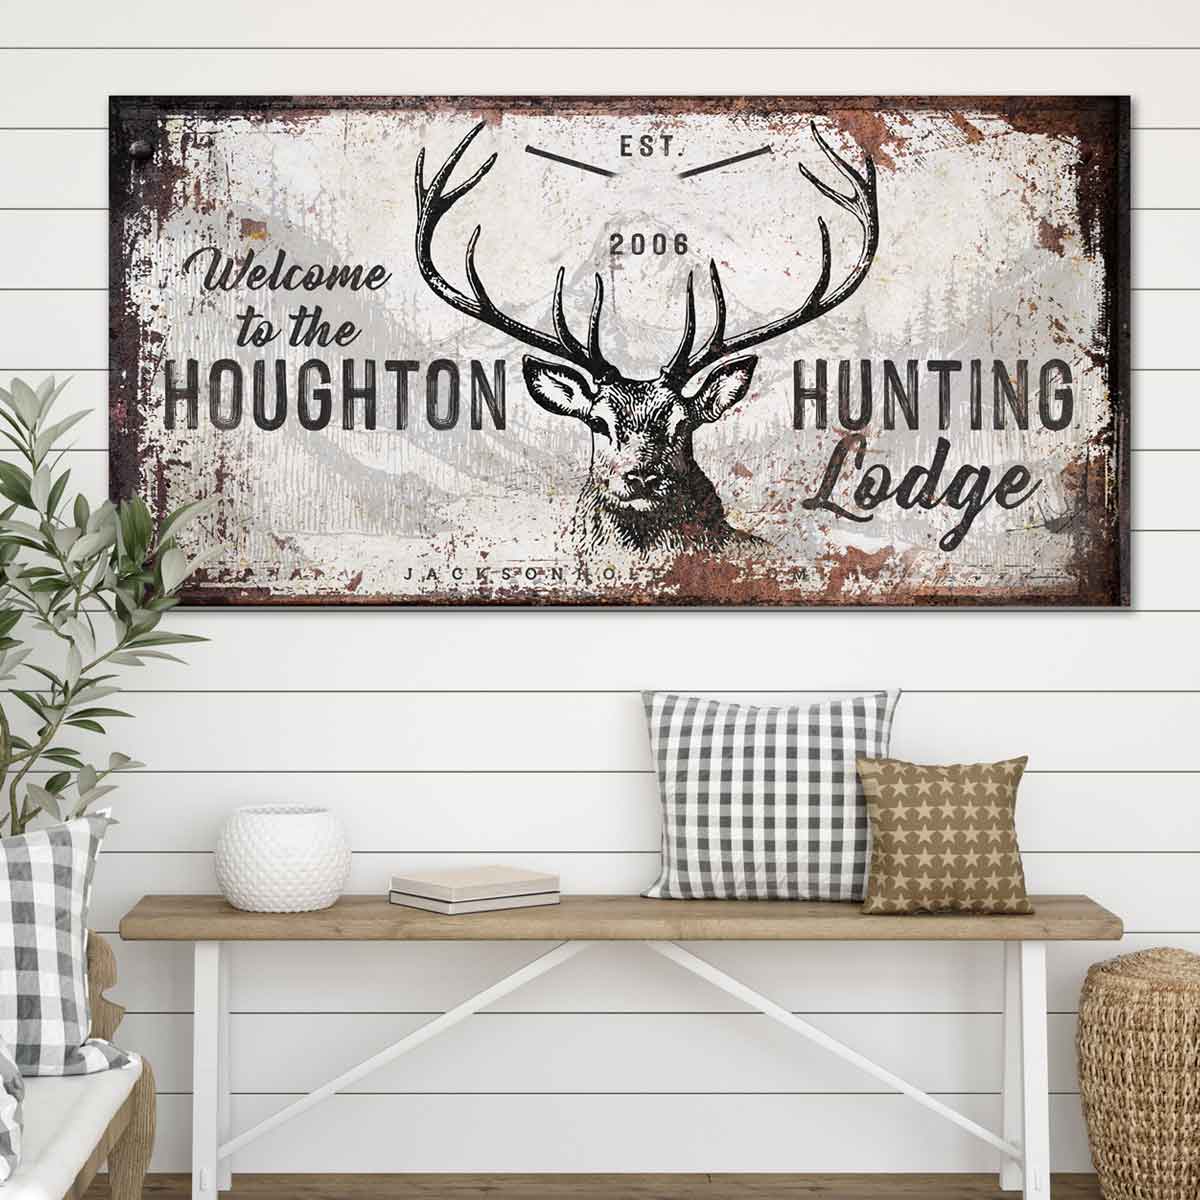 Hunting Lodge Sign or Deer Camp Sign with big buck with rack on faux metal canvas wall art perfect for cabin decor